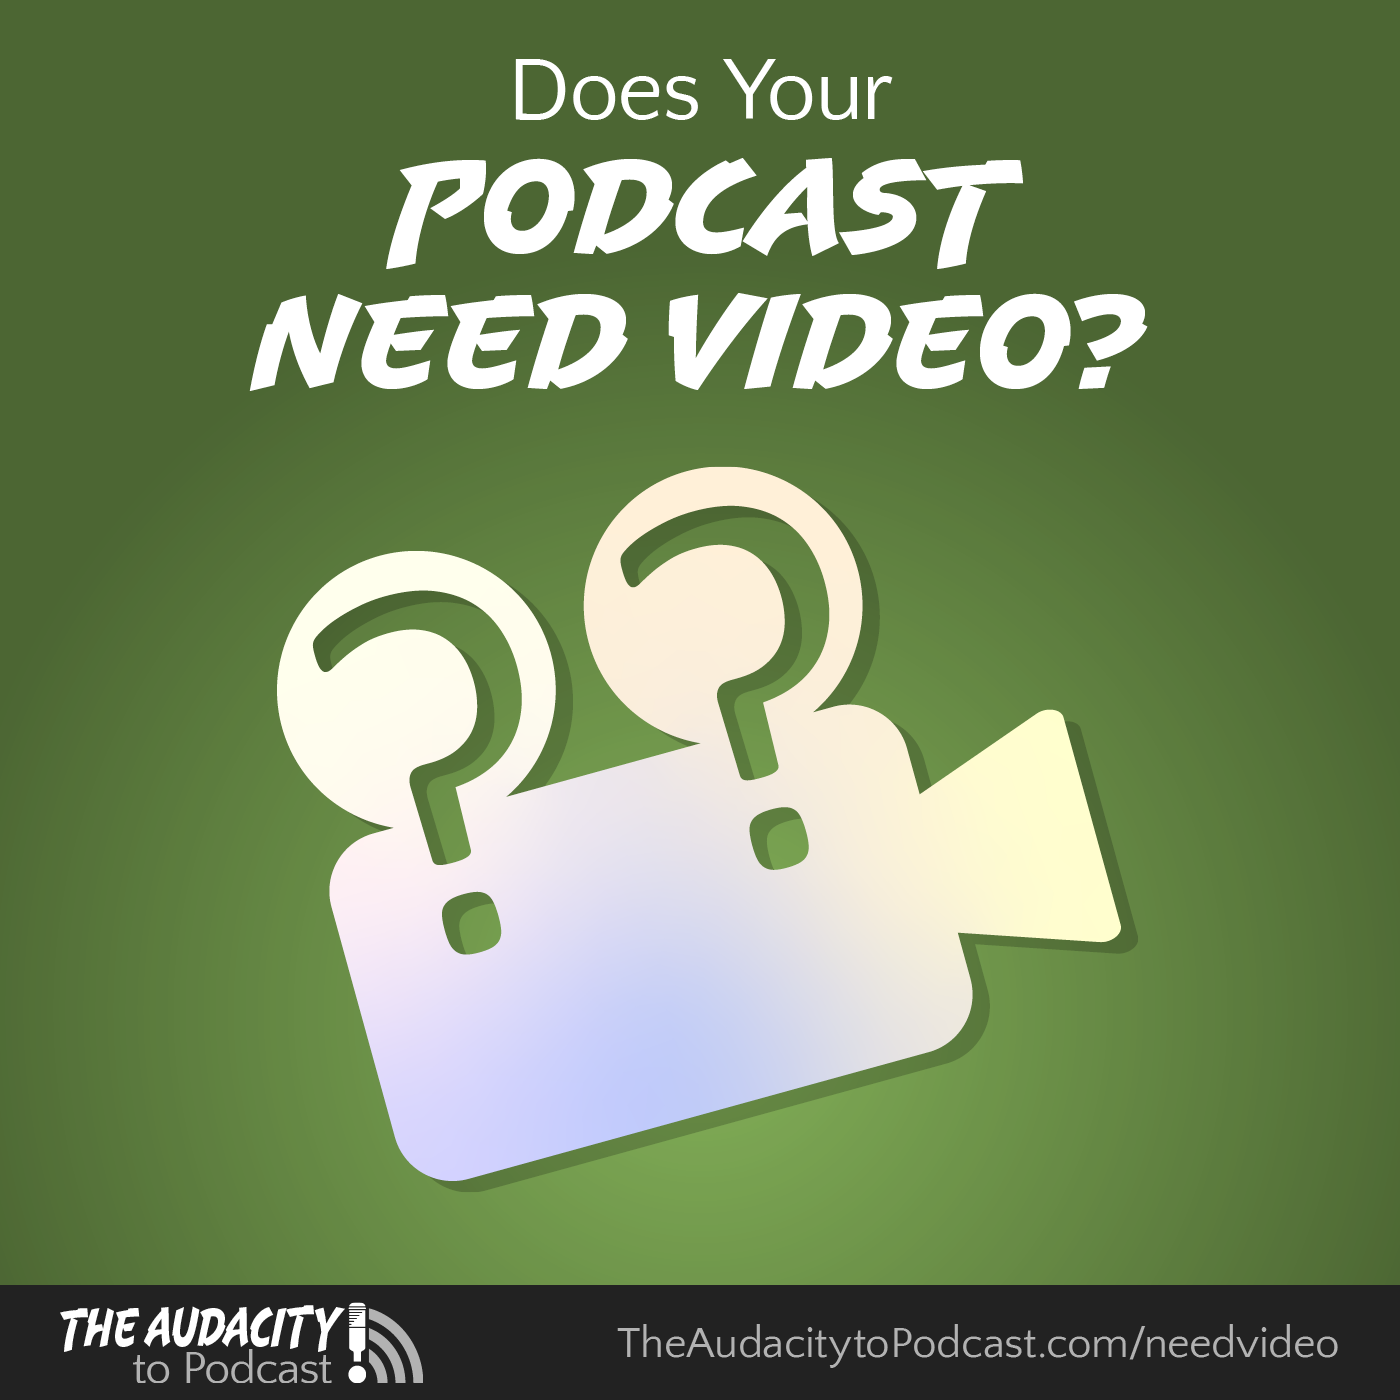 Does Your Podcast NEED Video?